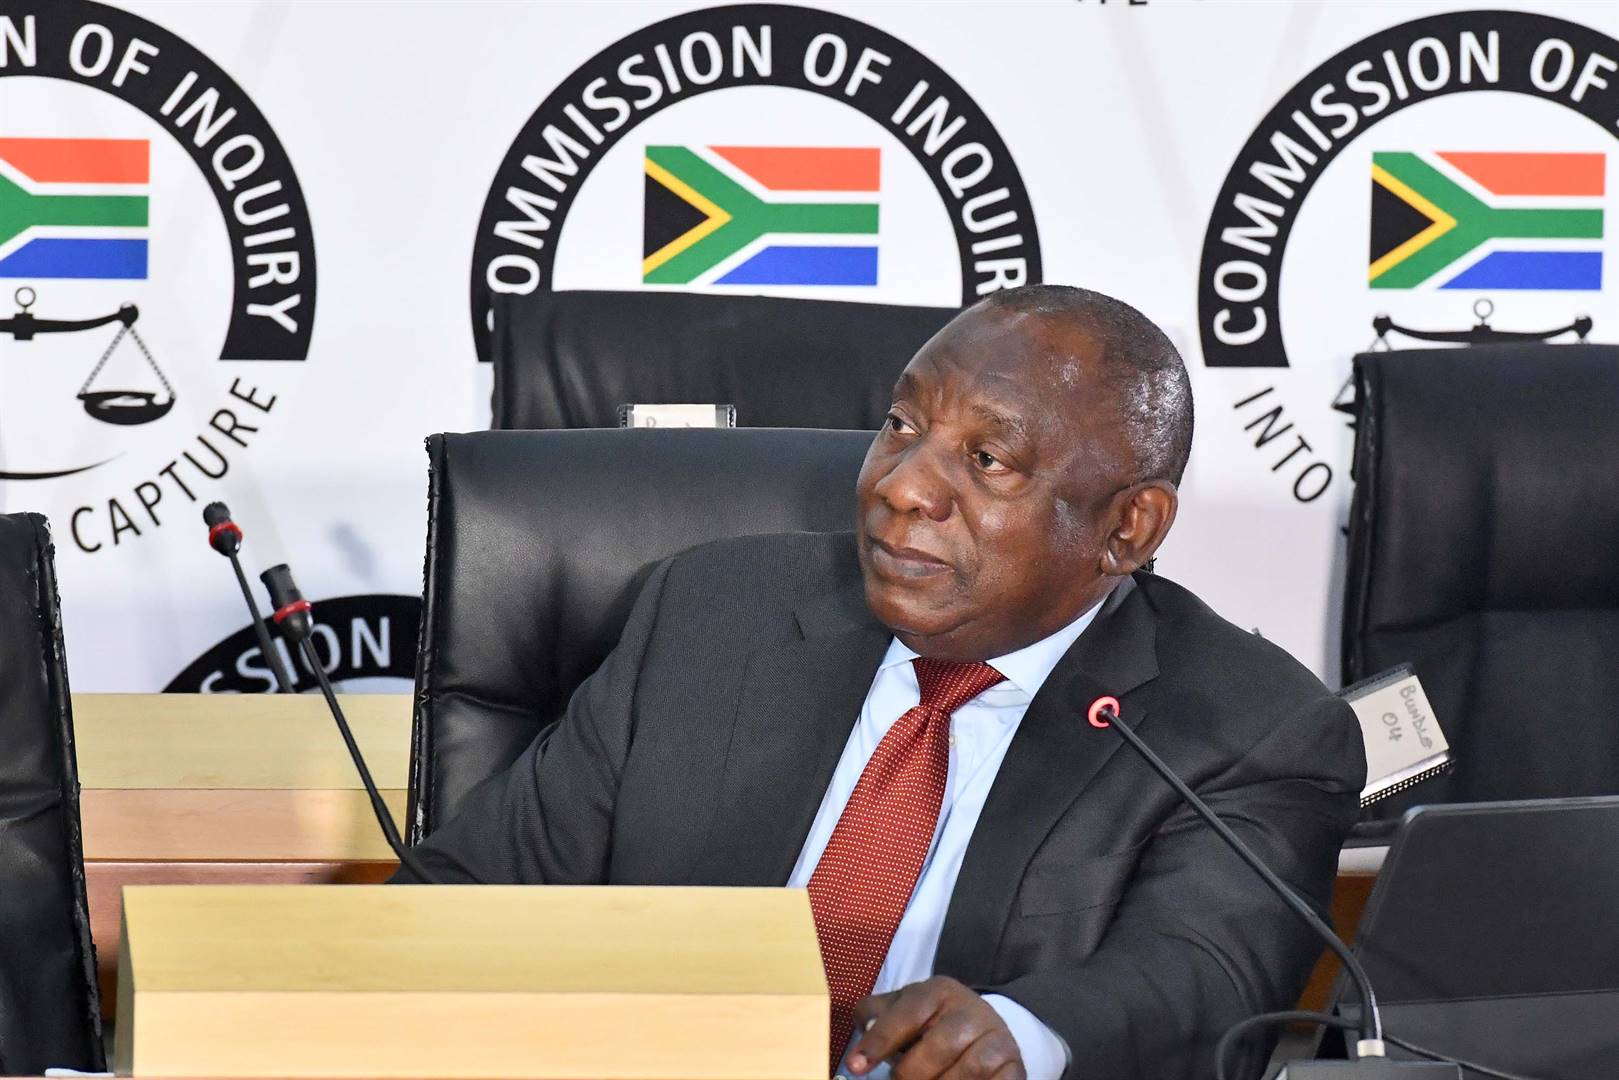 President Cyril Ramaphosa appears before the Judicial Commission of Inquiry into Allegations of State Capture, Corruption and Fraud in the Public Sector including Organs of State. Photo: Elmond Jiyane/GCIS